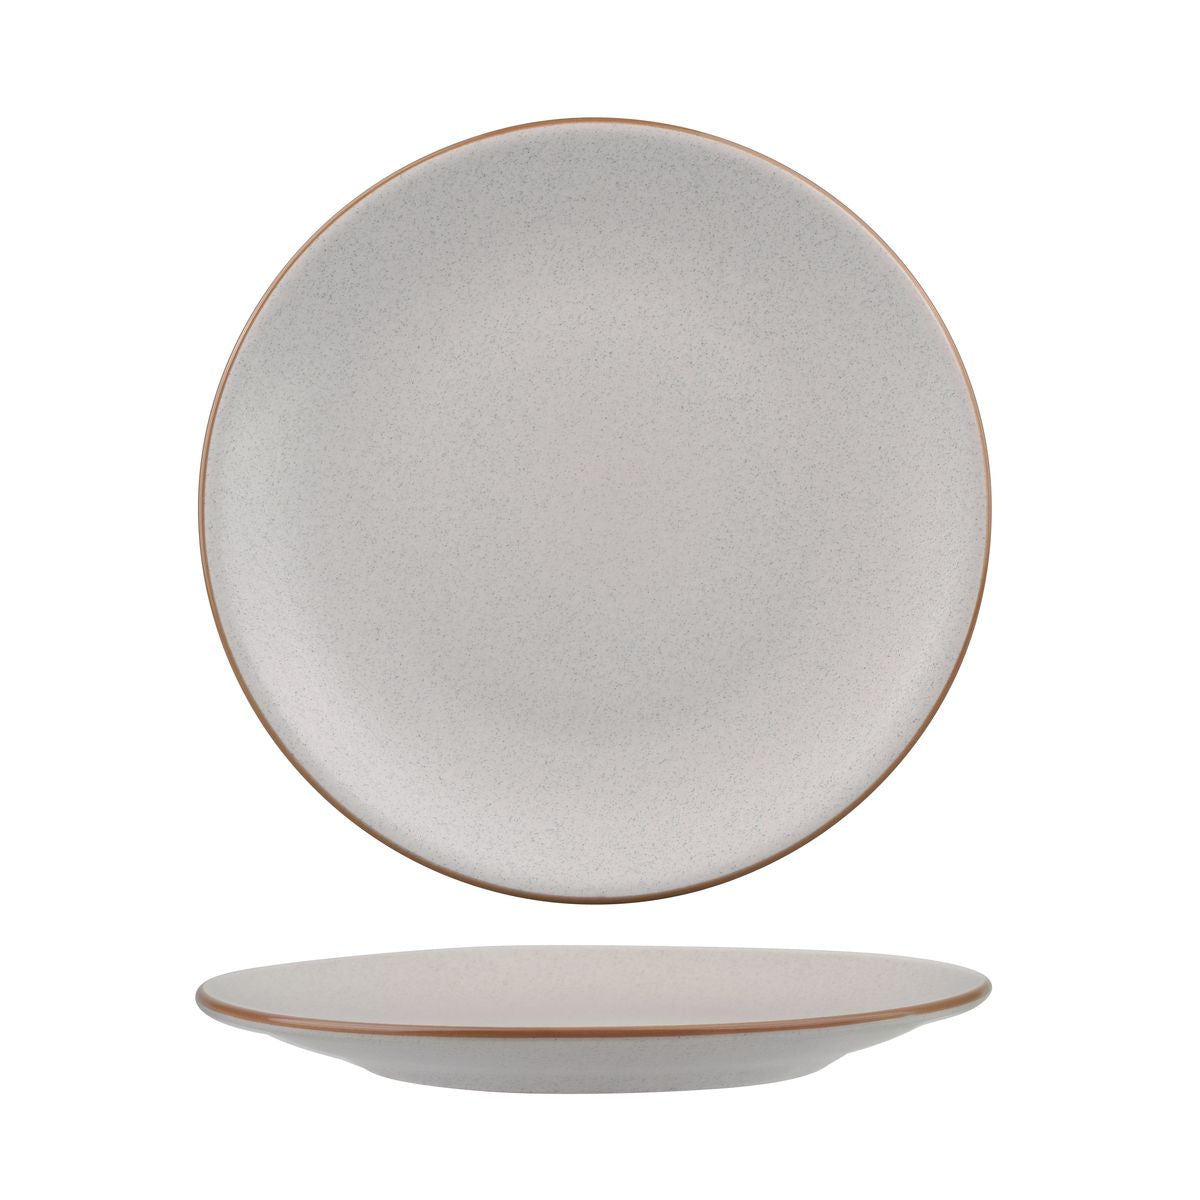 Round Coupe Plate - 230mm, Zuma Mineral from Zuma. Matt Finish, made out of Ceramic and sold in boxes of 6. Hospitality quality at wholesale price with The Flying Fork! 